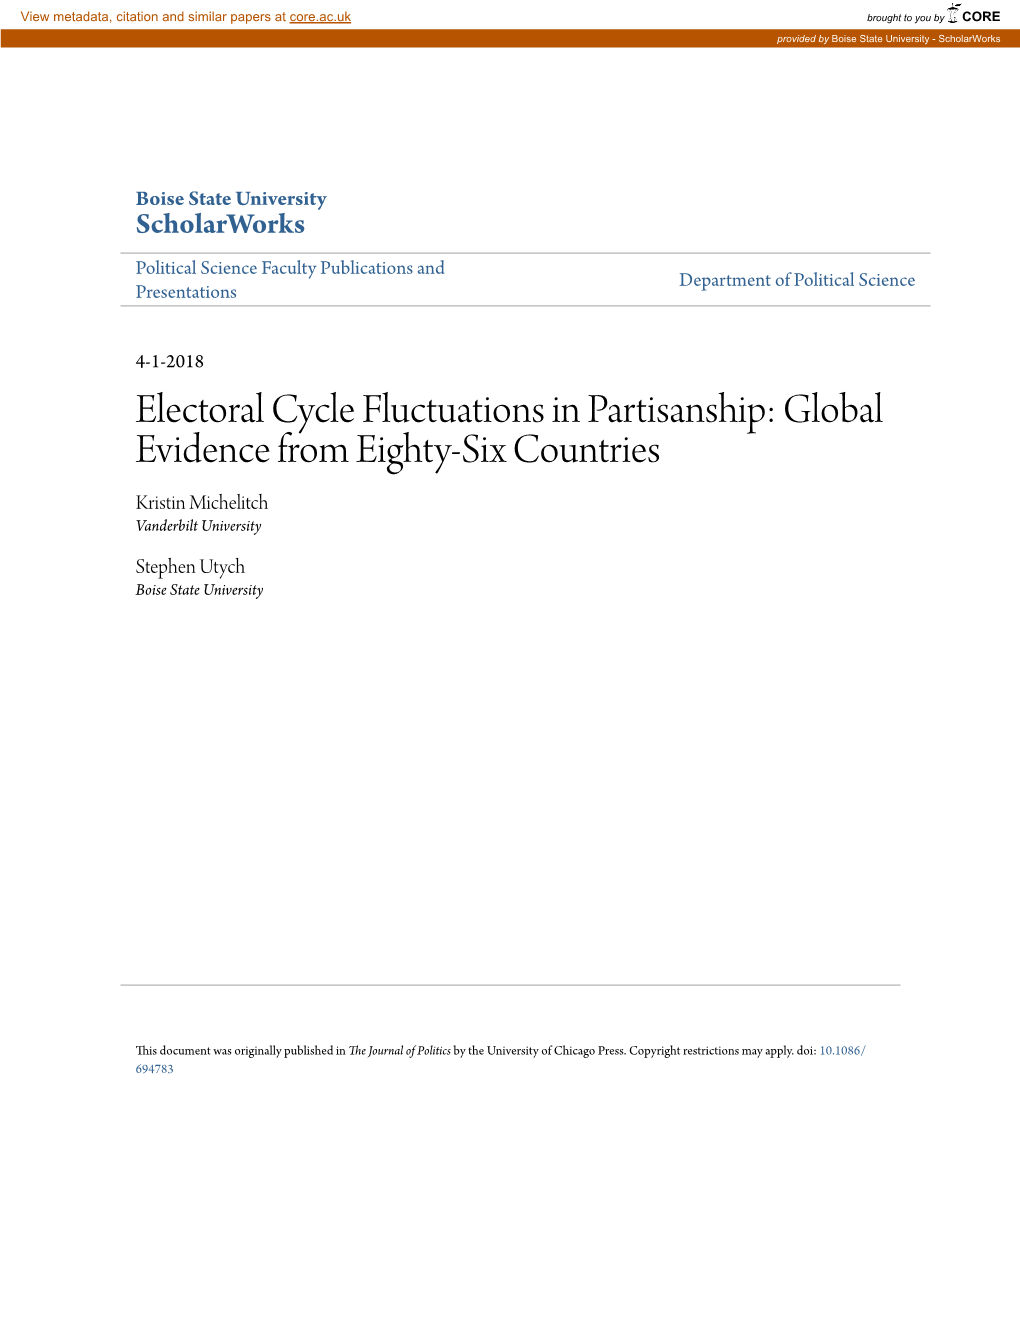 Electoral Cycle Fluctuations in Partisanship: Global Evidence from Eighty-Six Countries Kristin Michelitch Vanderbilt University